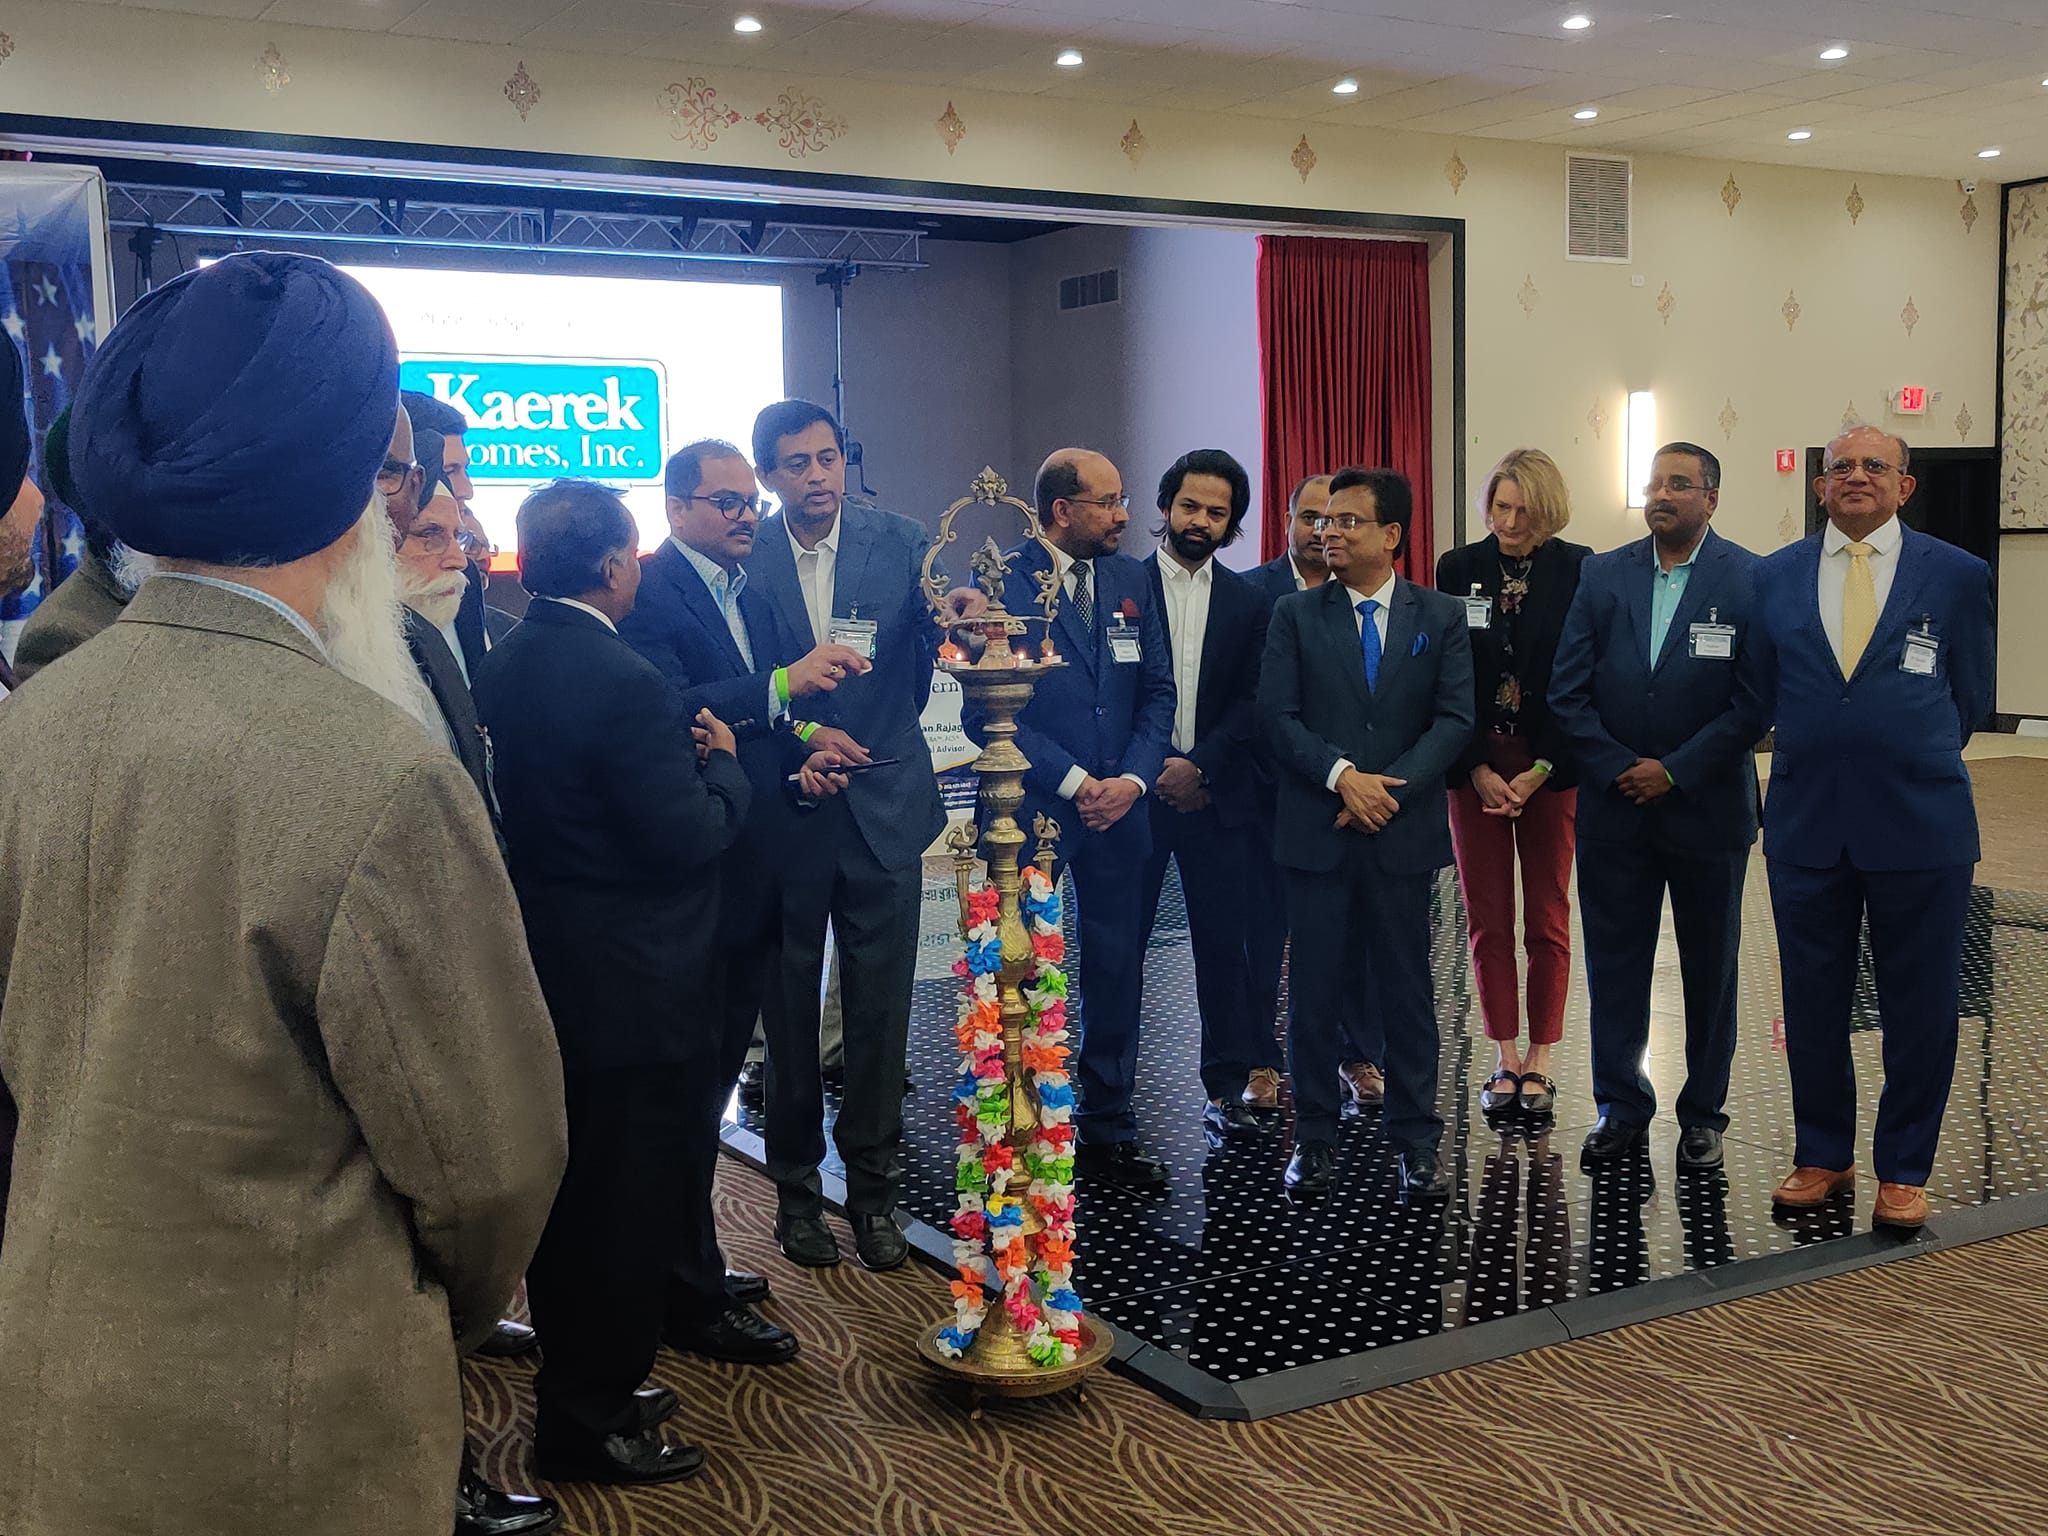 Consul General Somnath Ghosh addressed the inaugural session of the American Association of Engineers of Indian Origin (Milwaukee Chapter) and discussed means to leverage the Association's expertise and experience to expand India-USA technology engagements.